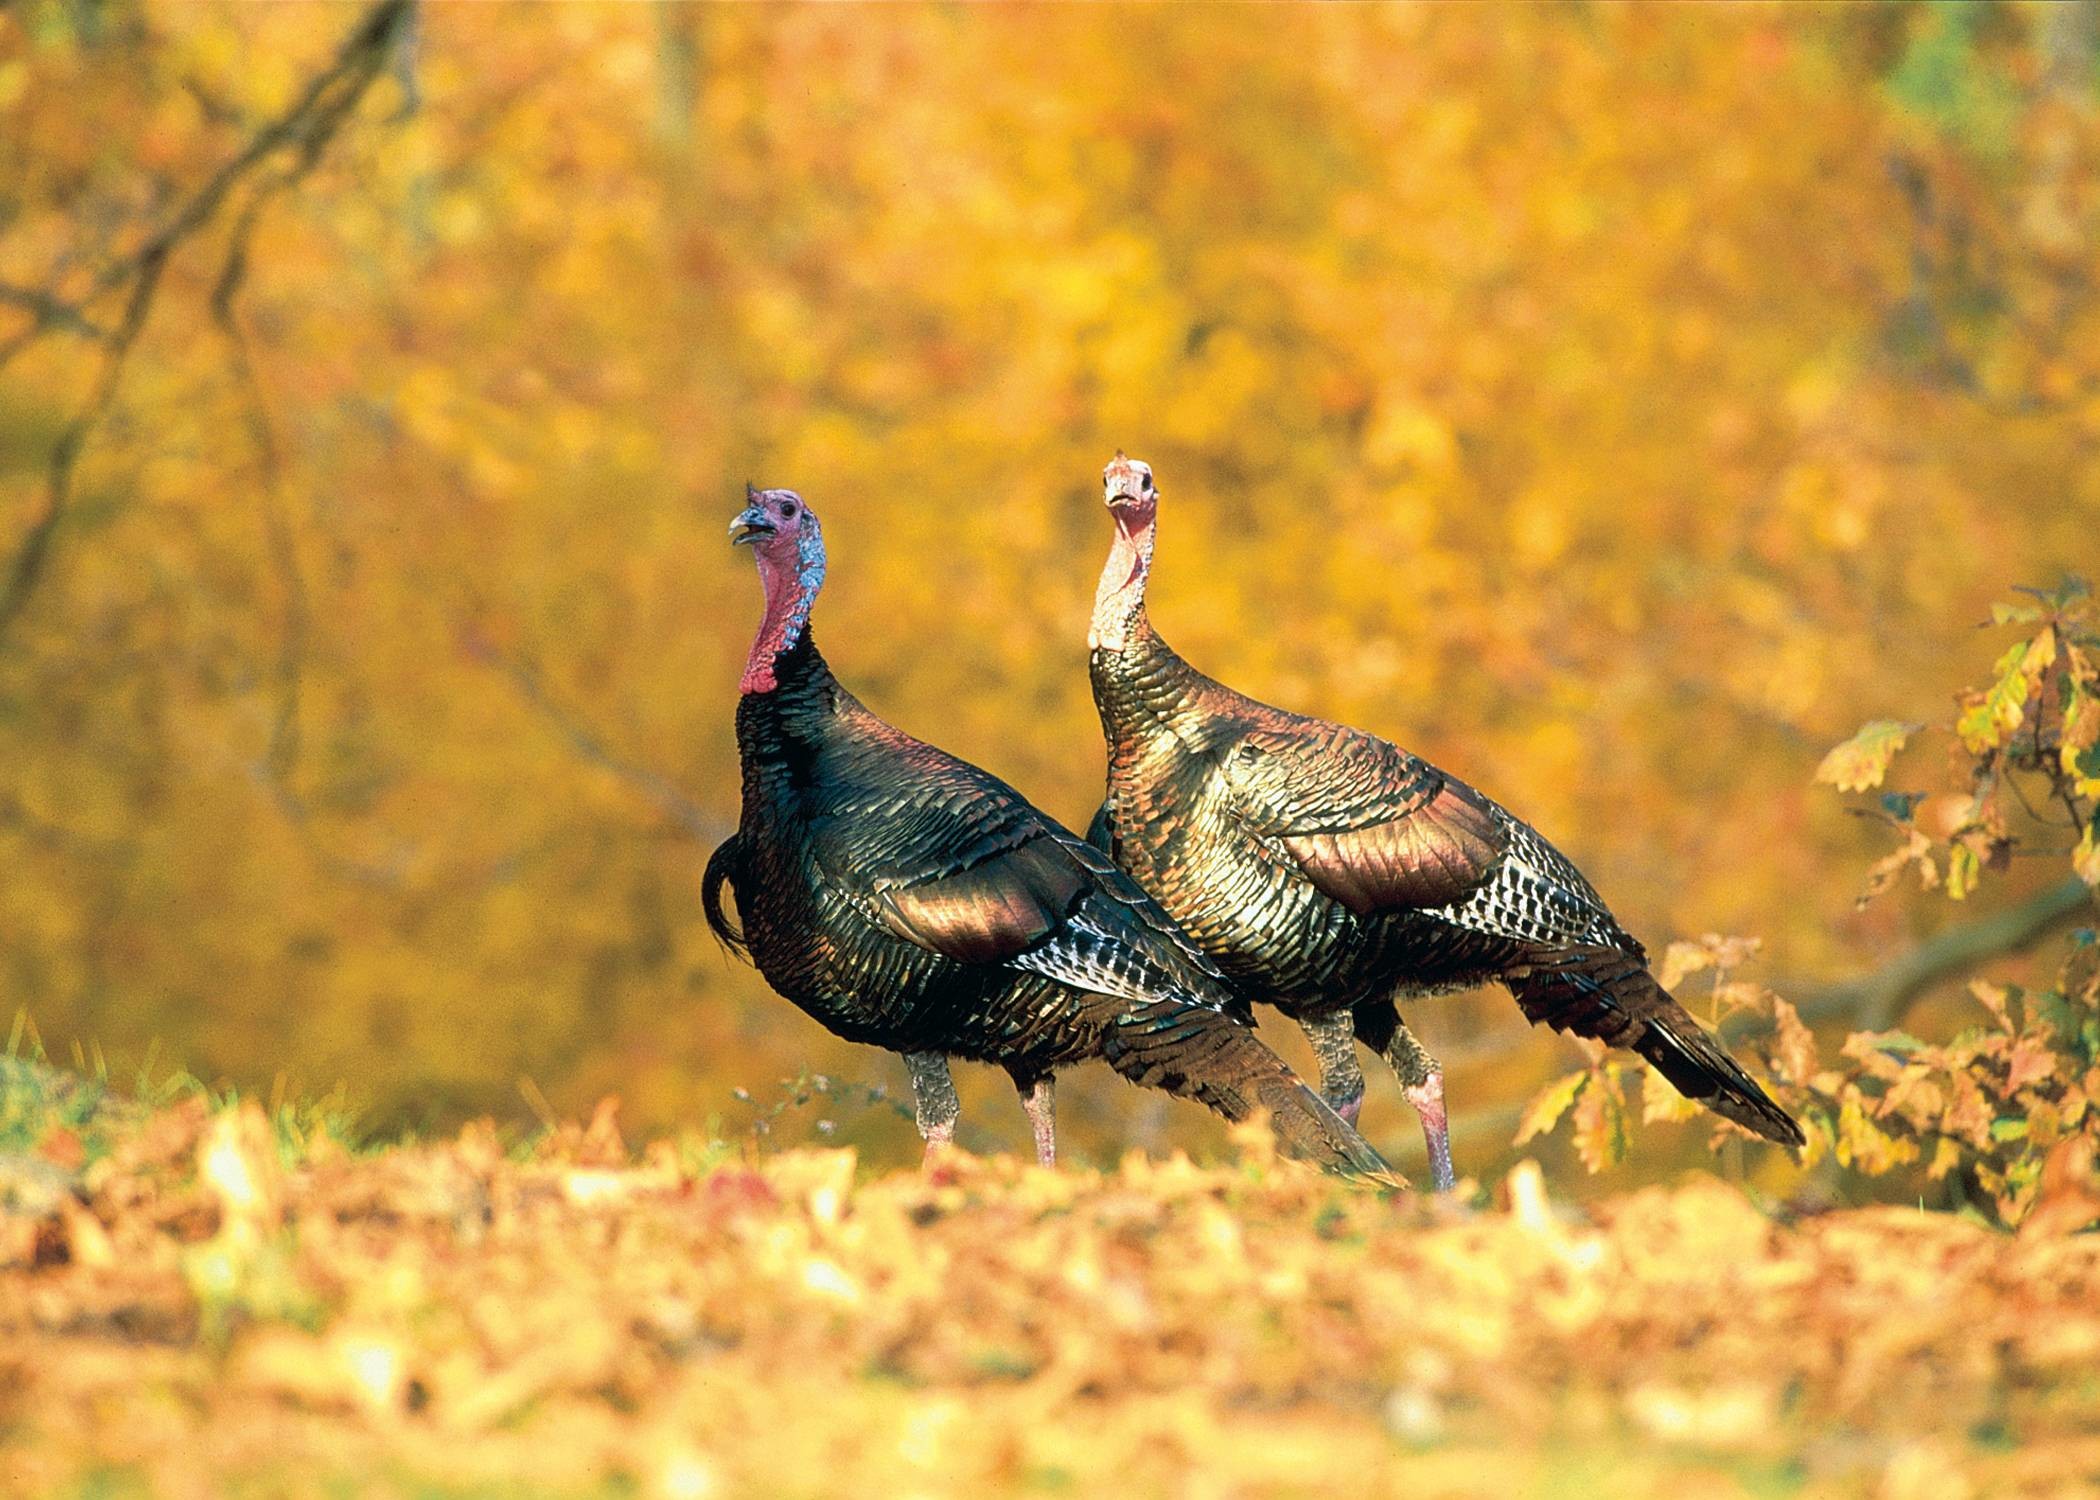 2100x1500 Turkey searching for food among the leaves. Photo by Maslowski/NWTF .